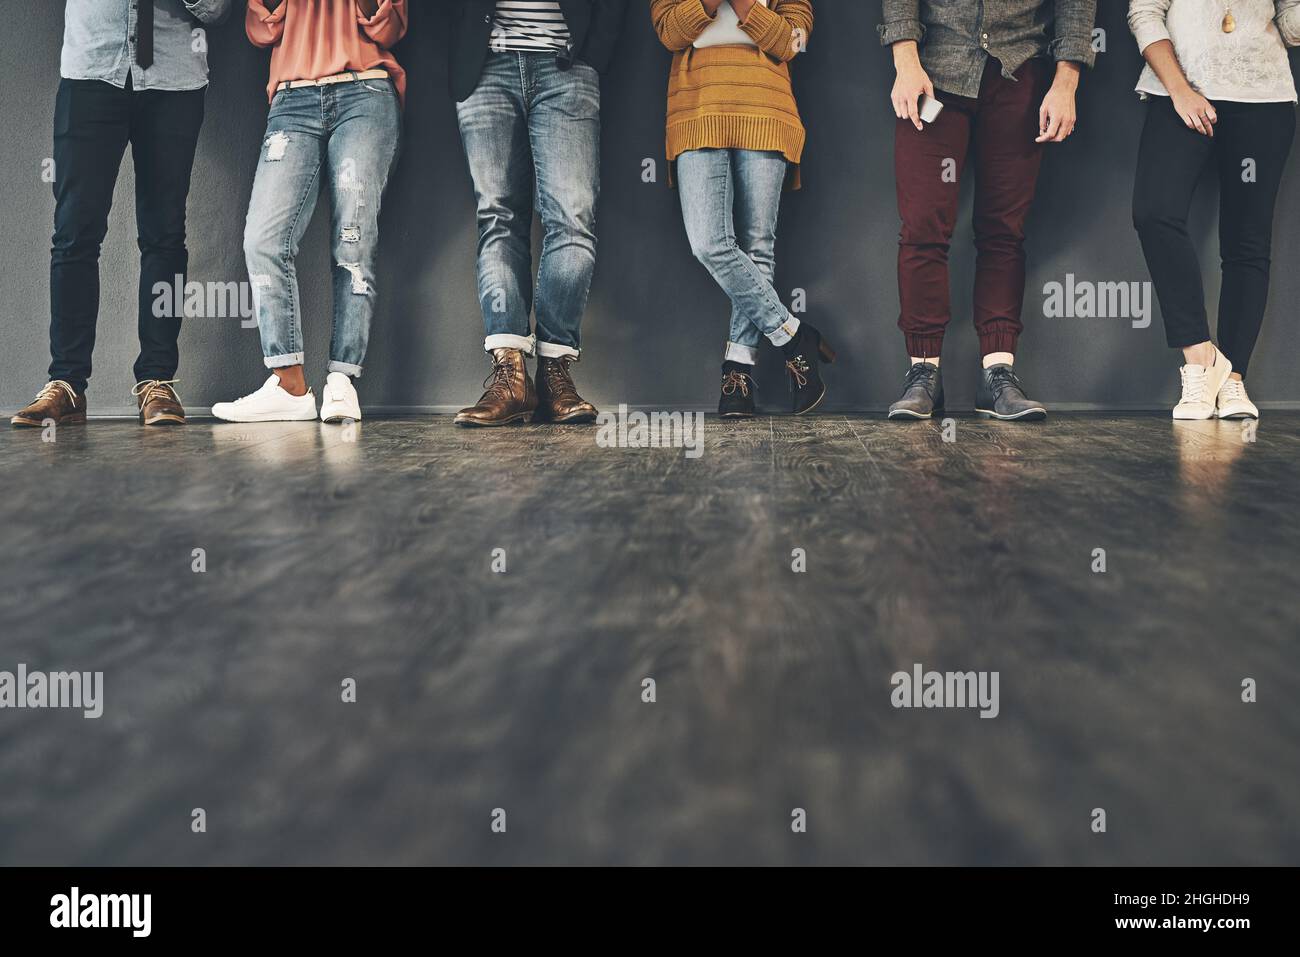 Stand for what you want and we want social networking Stock Photo - Alamy